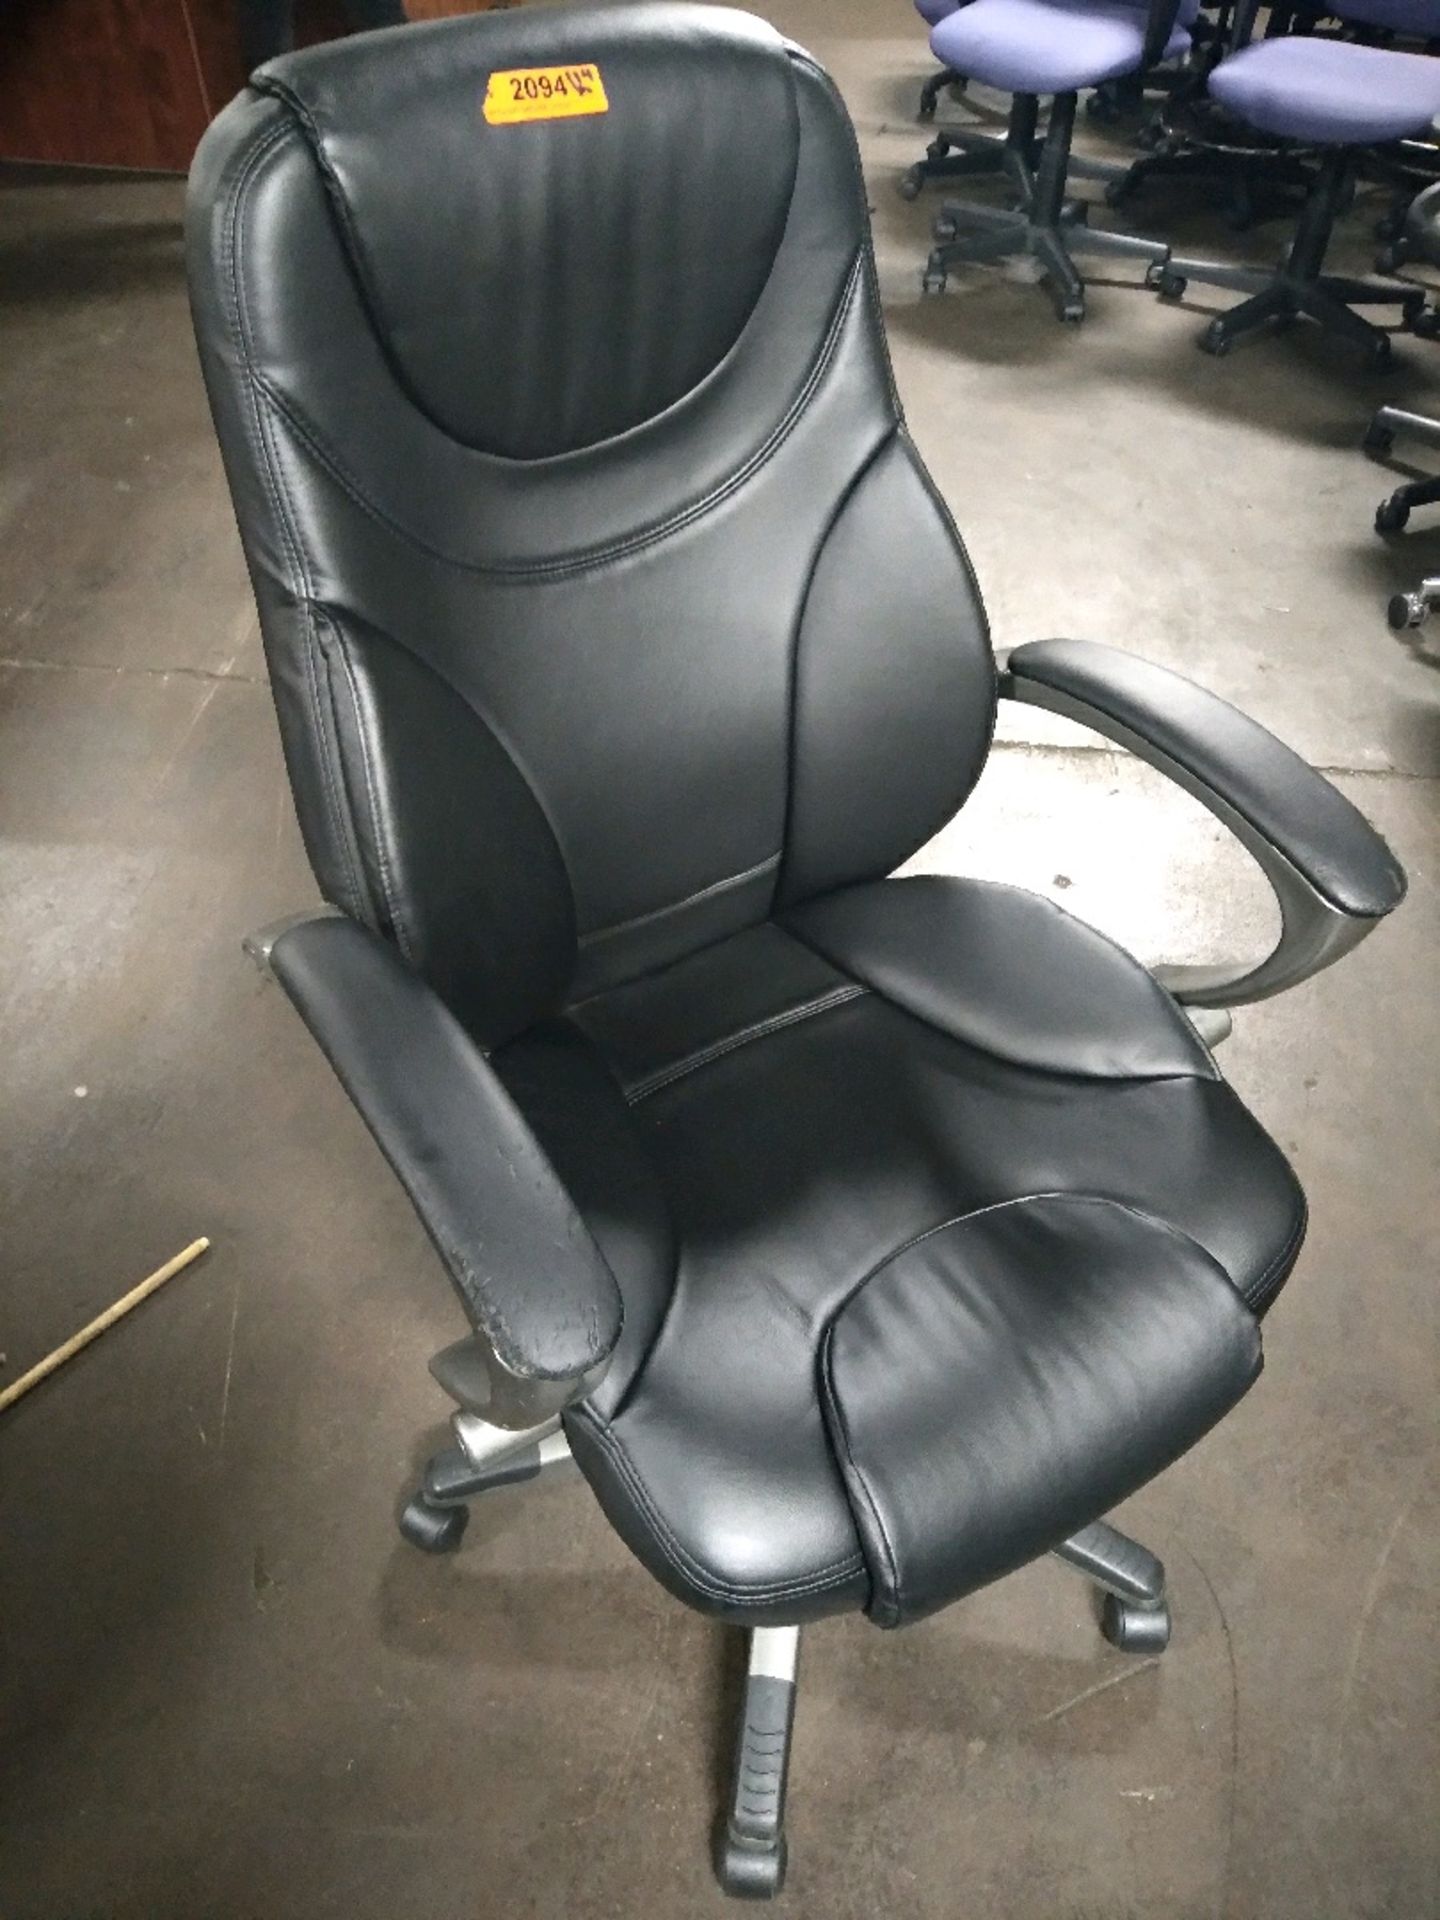 TASK OFFICE ARM-CHAIRS ON WHEELS QTY: 14, LOCATED: 3821 N. FRATNEY STREET MILWAUKEE, WI 53212